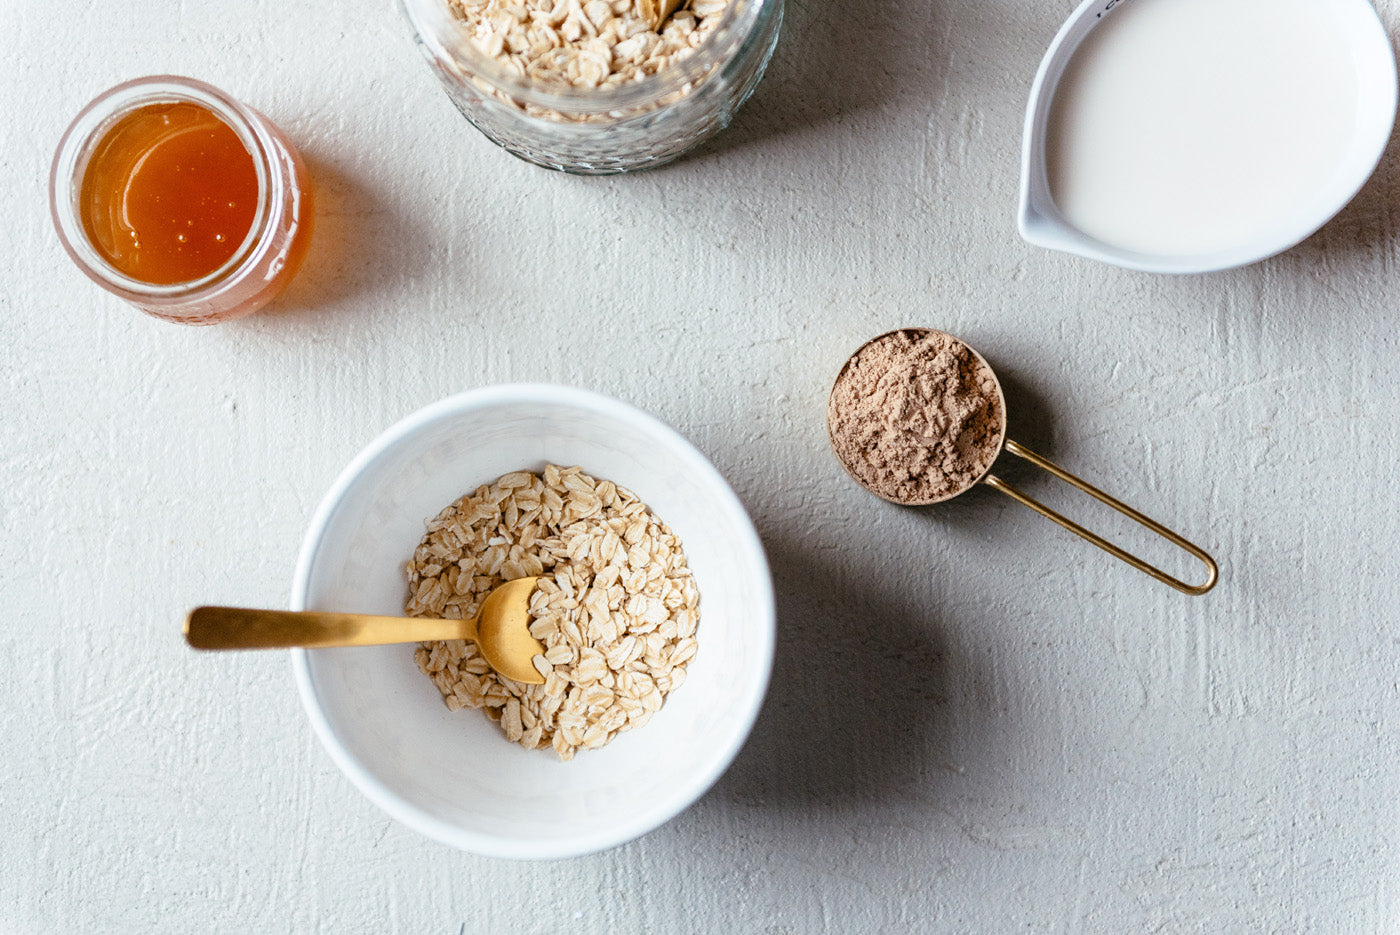 How to add protein to oatmeal